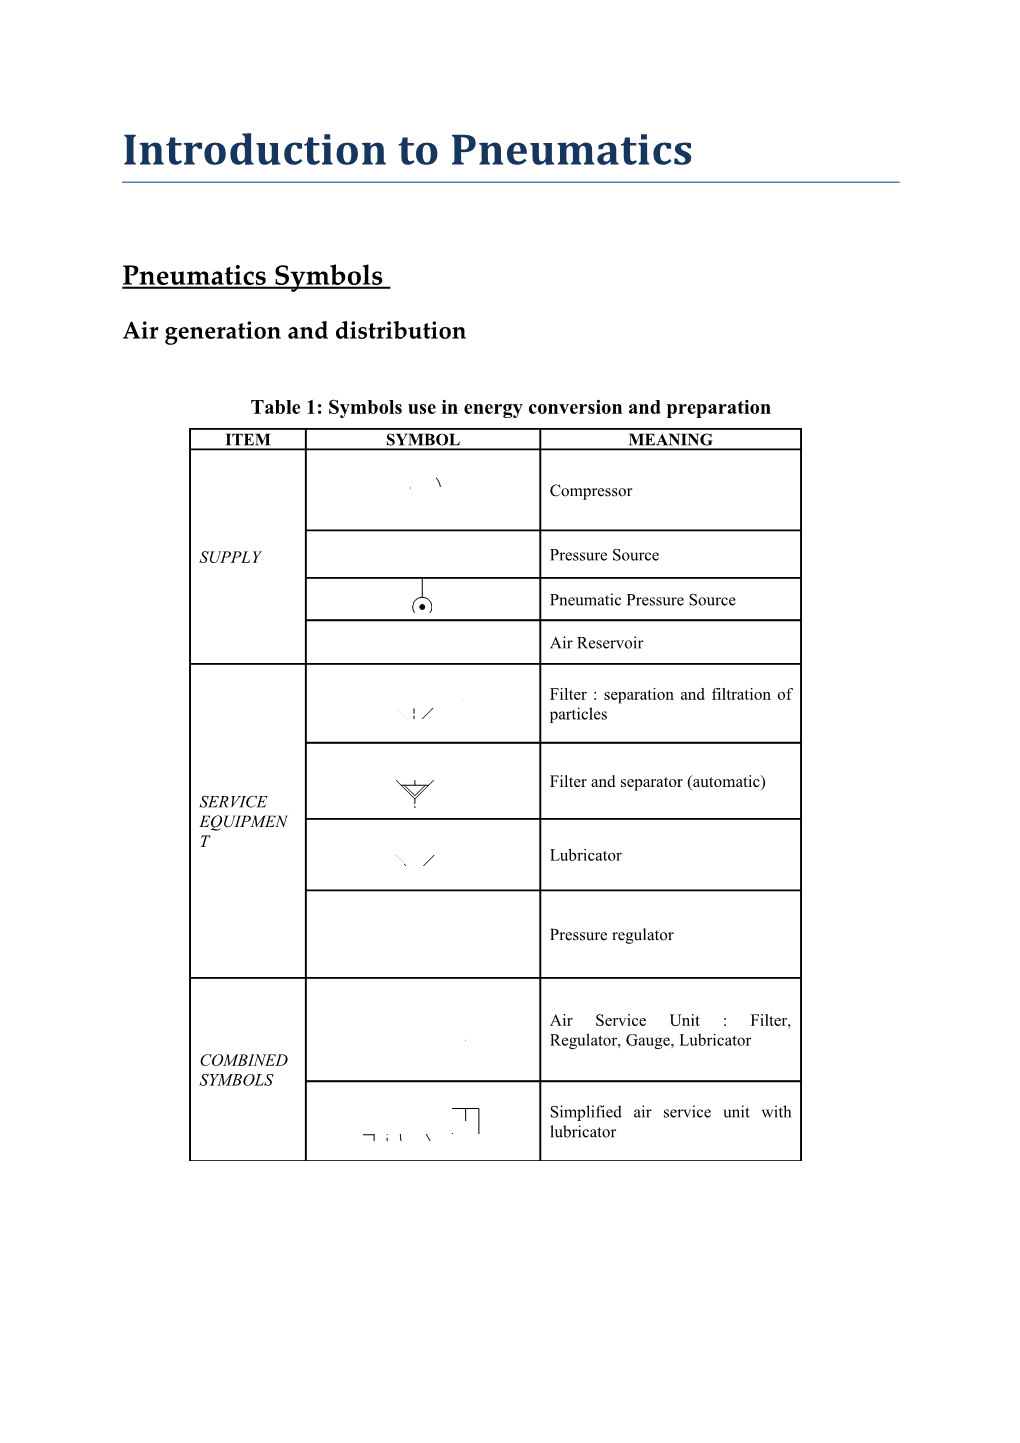 Table 1: Symbols Use in Energy Conversion and Preparation